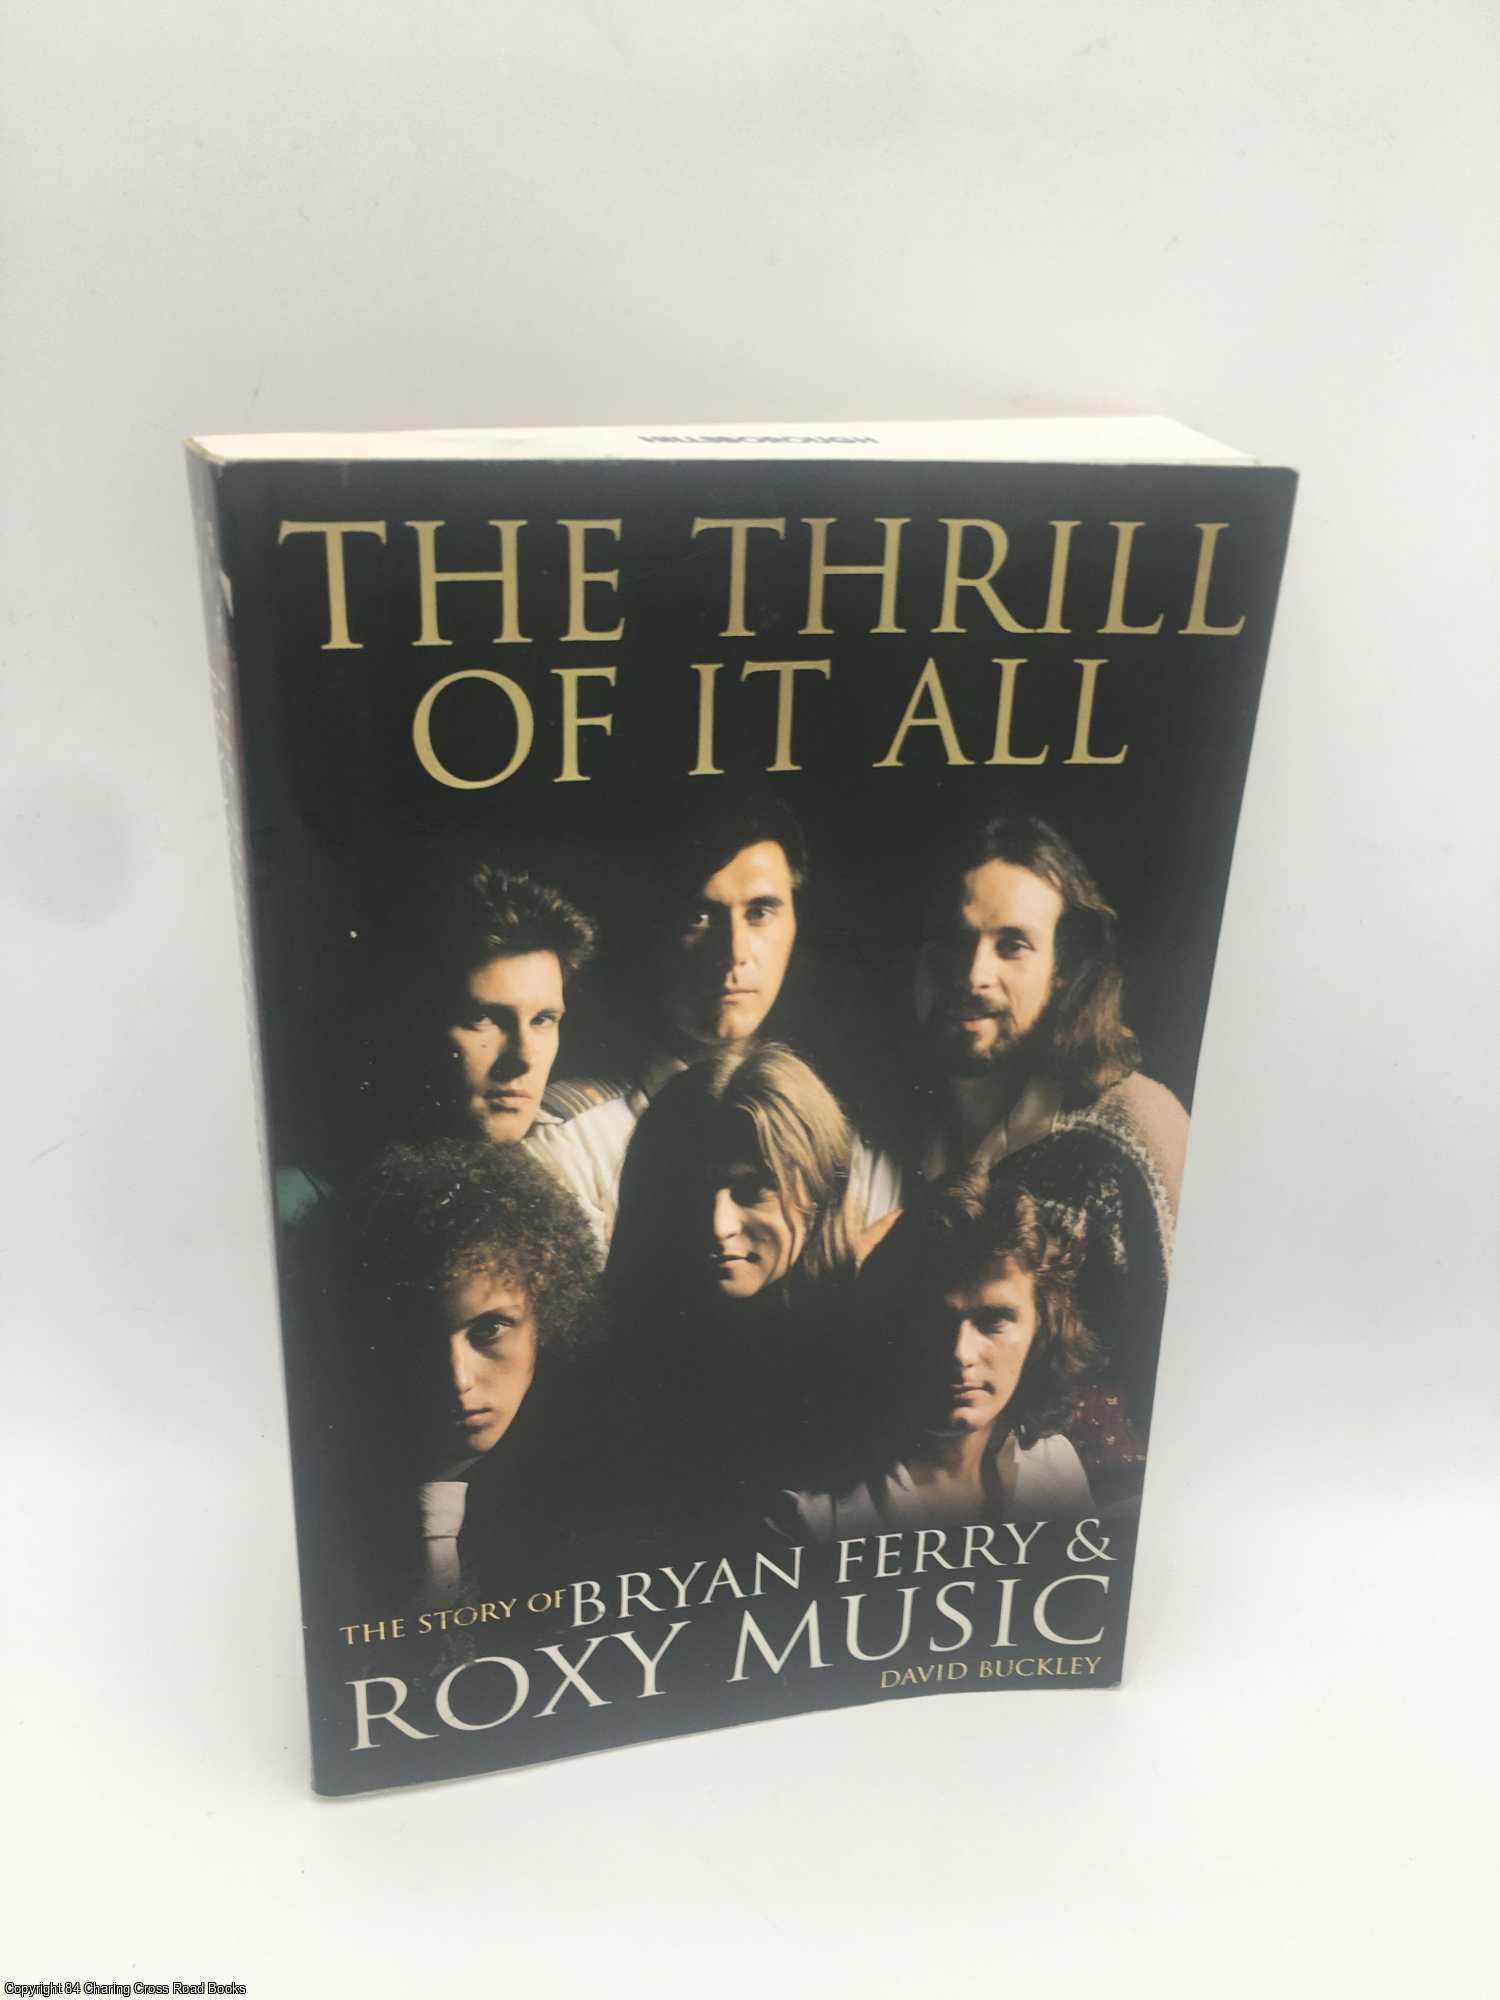 Buckley, David - Bryan Ferry and Roxy Music: The Thrill of It All